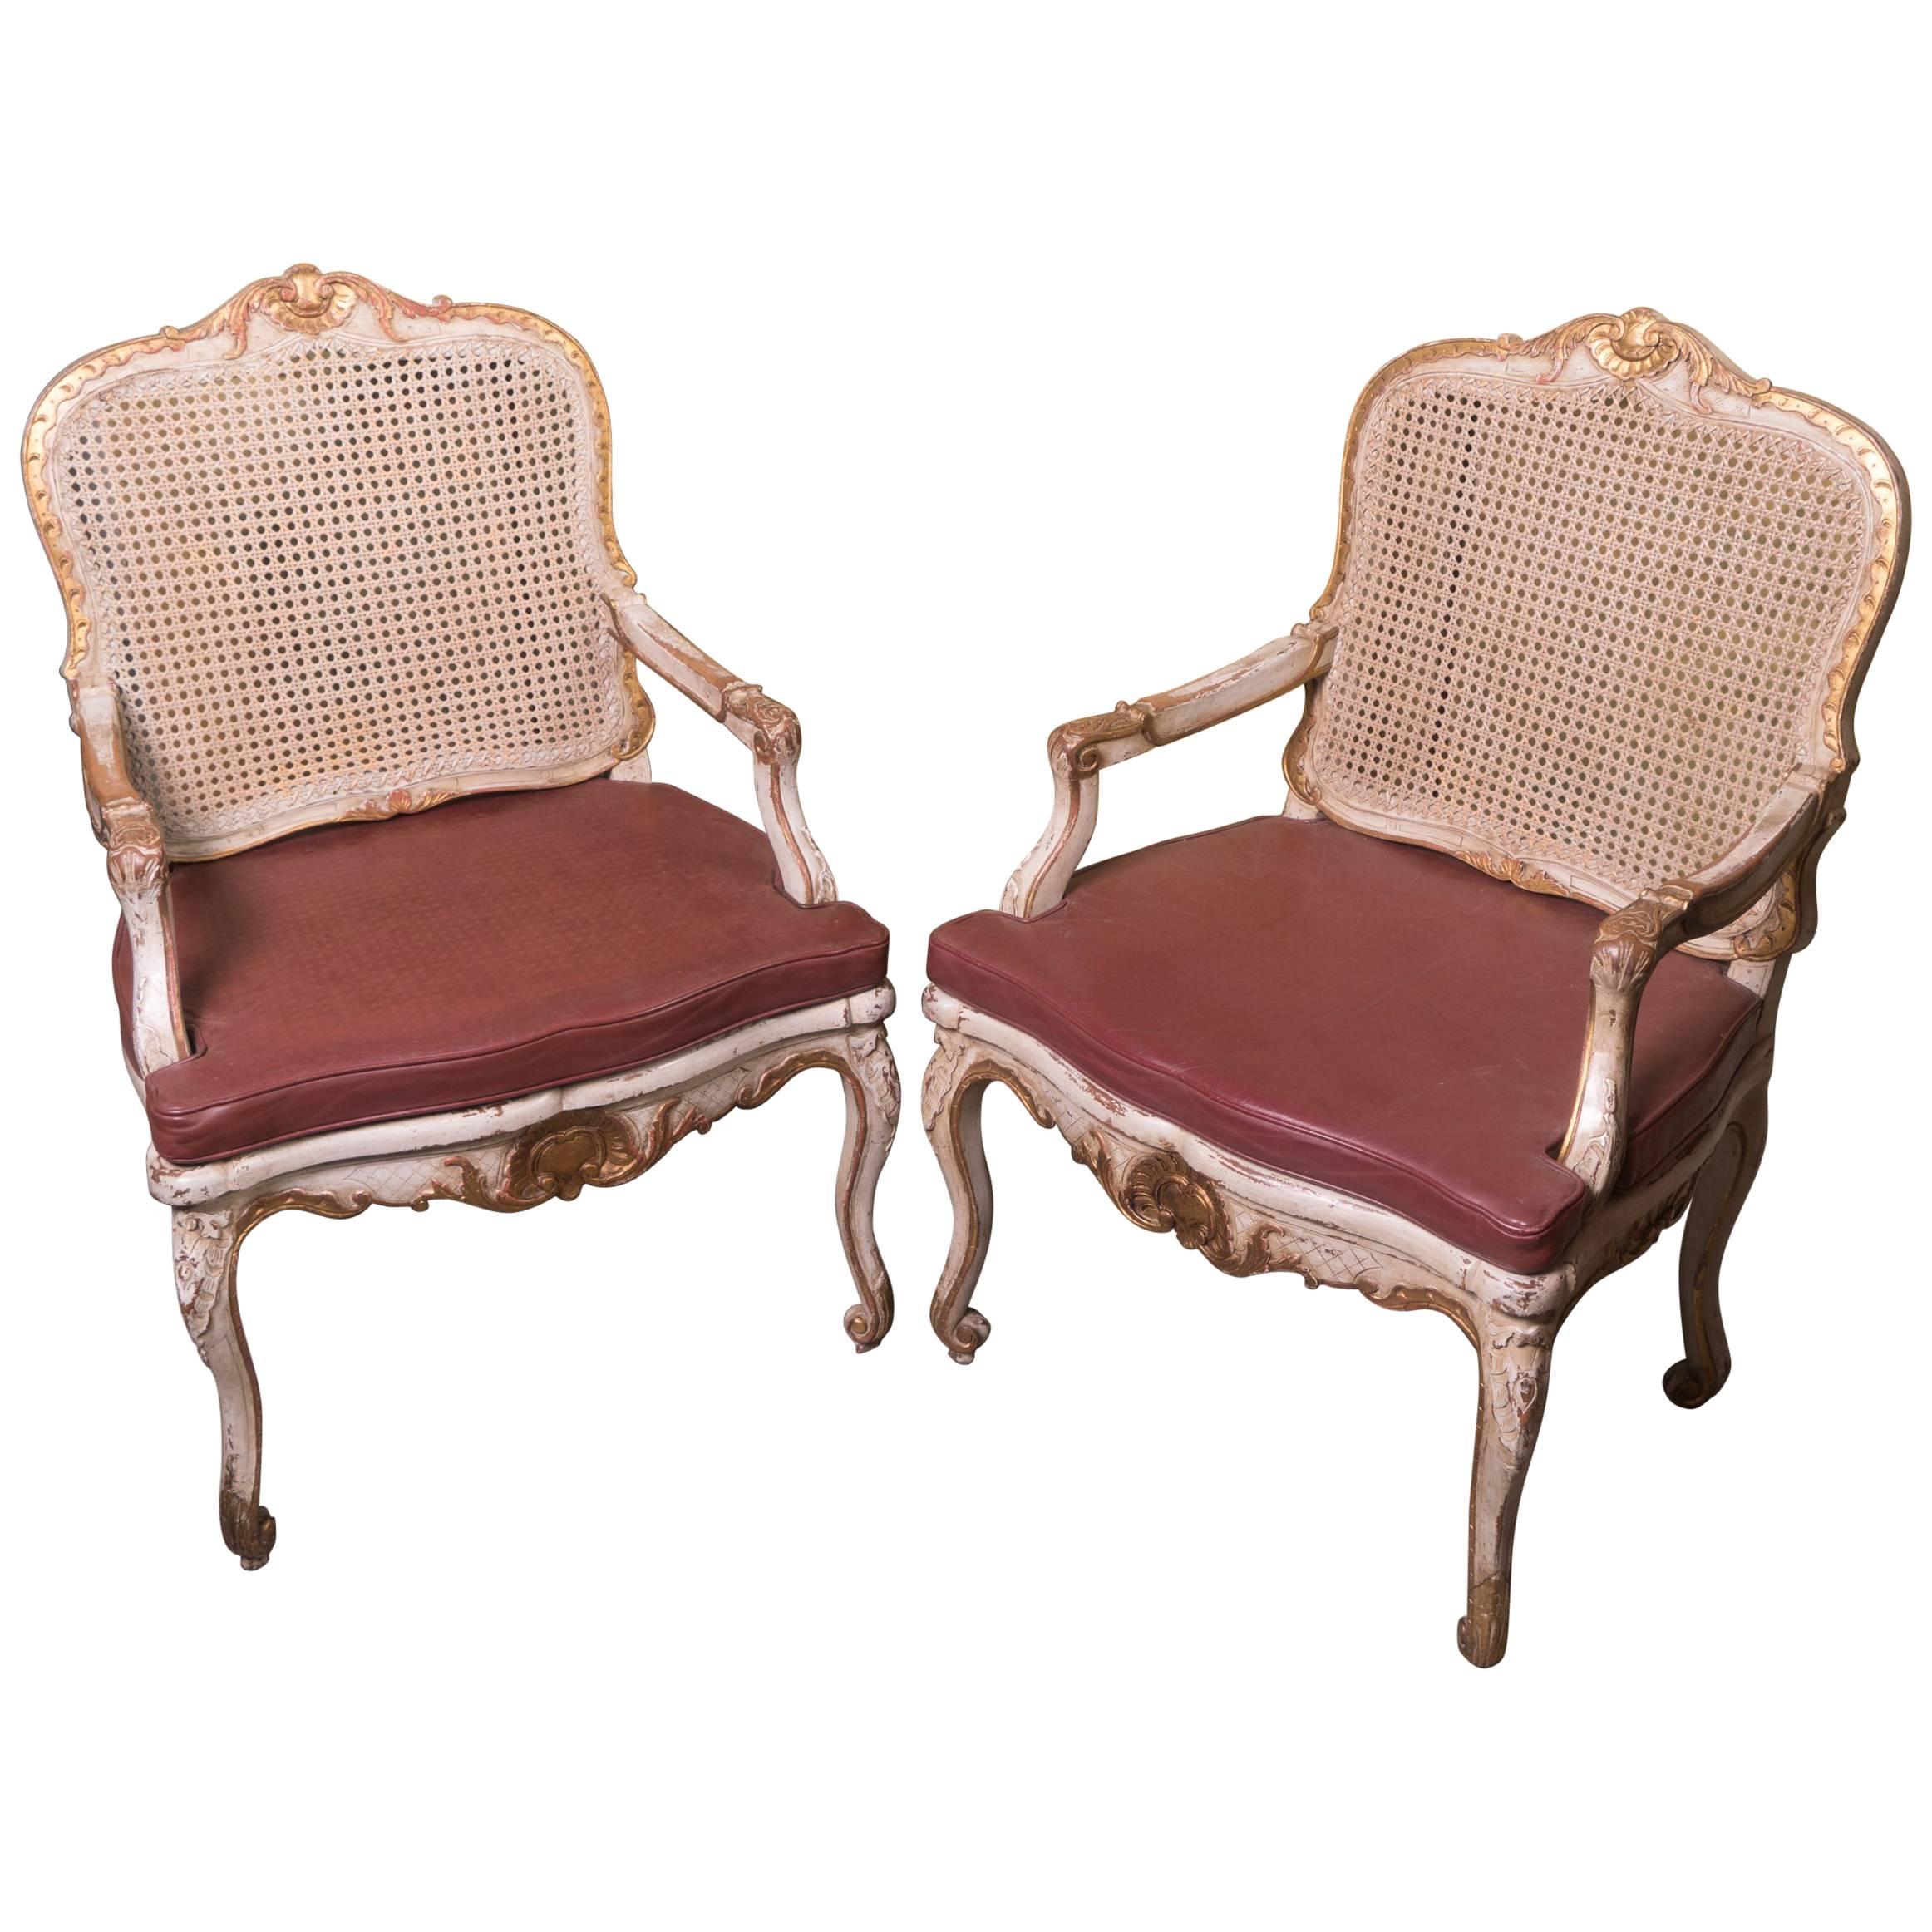 Pair of Painted and Gilded Caned Regence Chairs